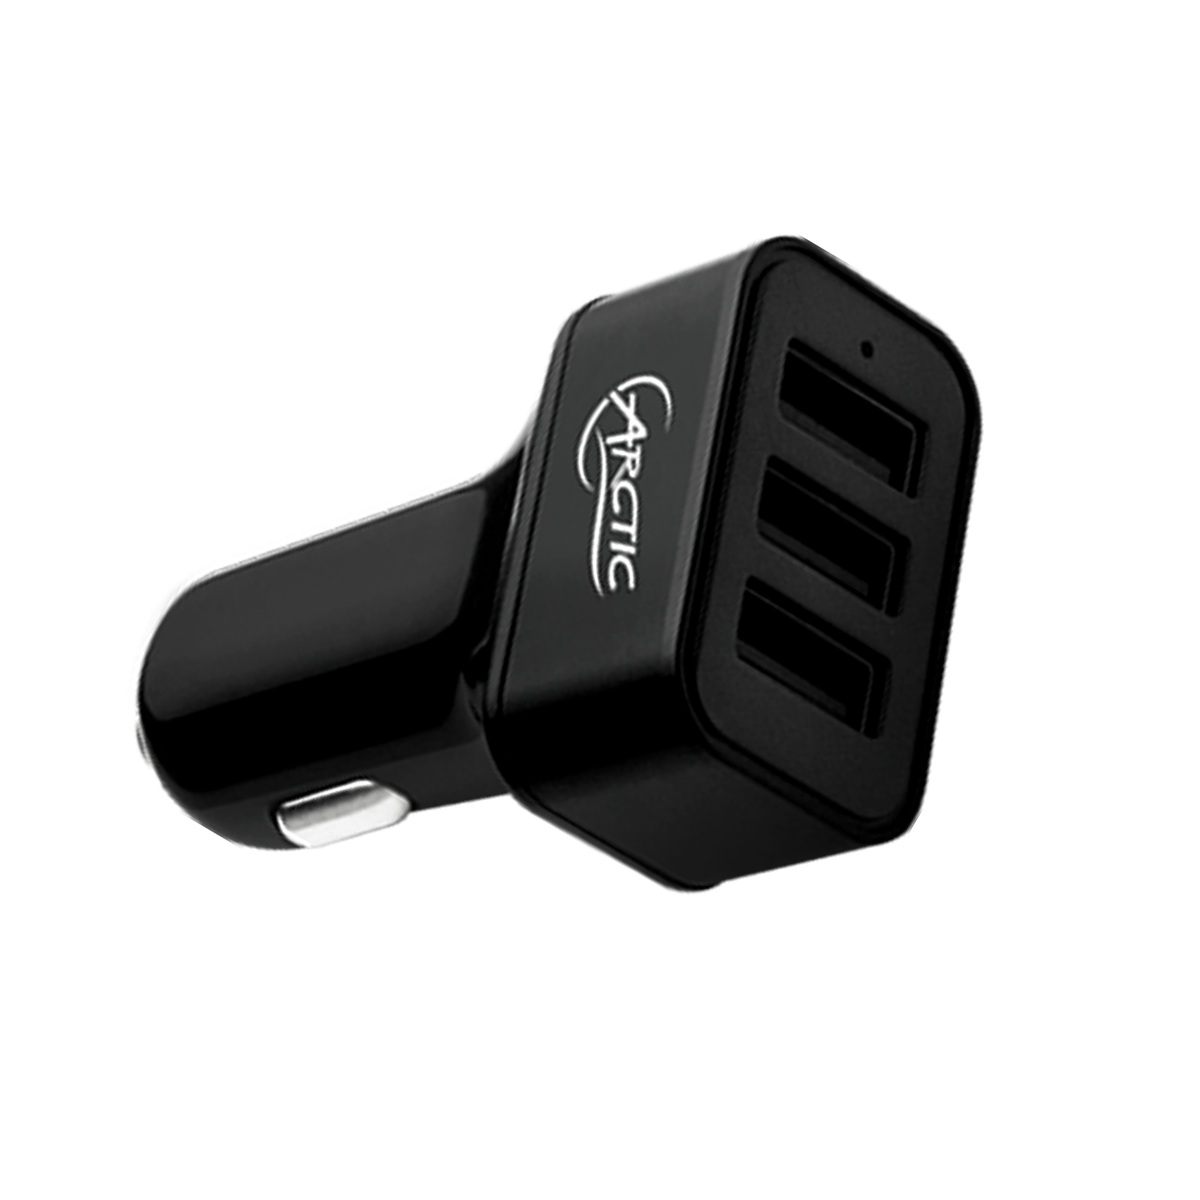 Highspeed Car Charger with 3 USB Ports ARCTIC Car Charger 7200